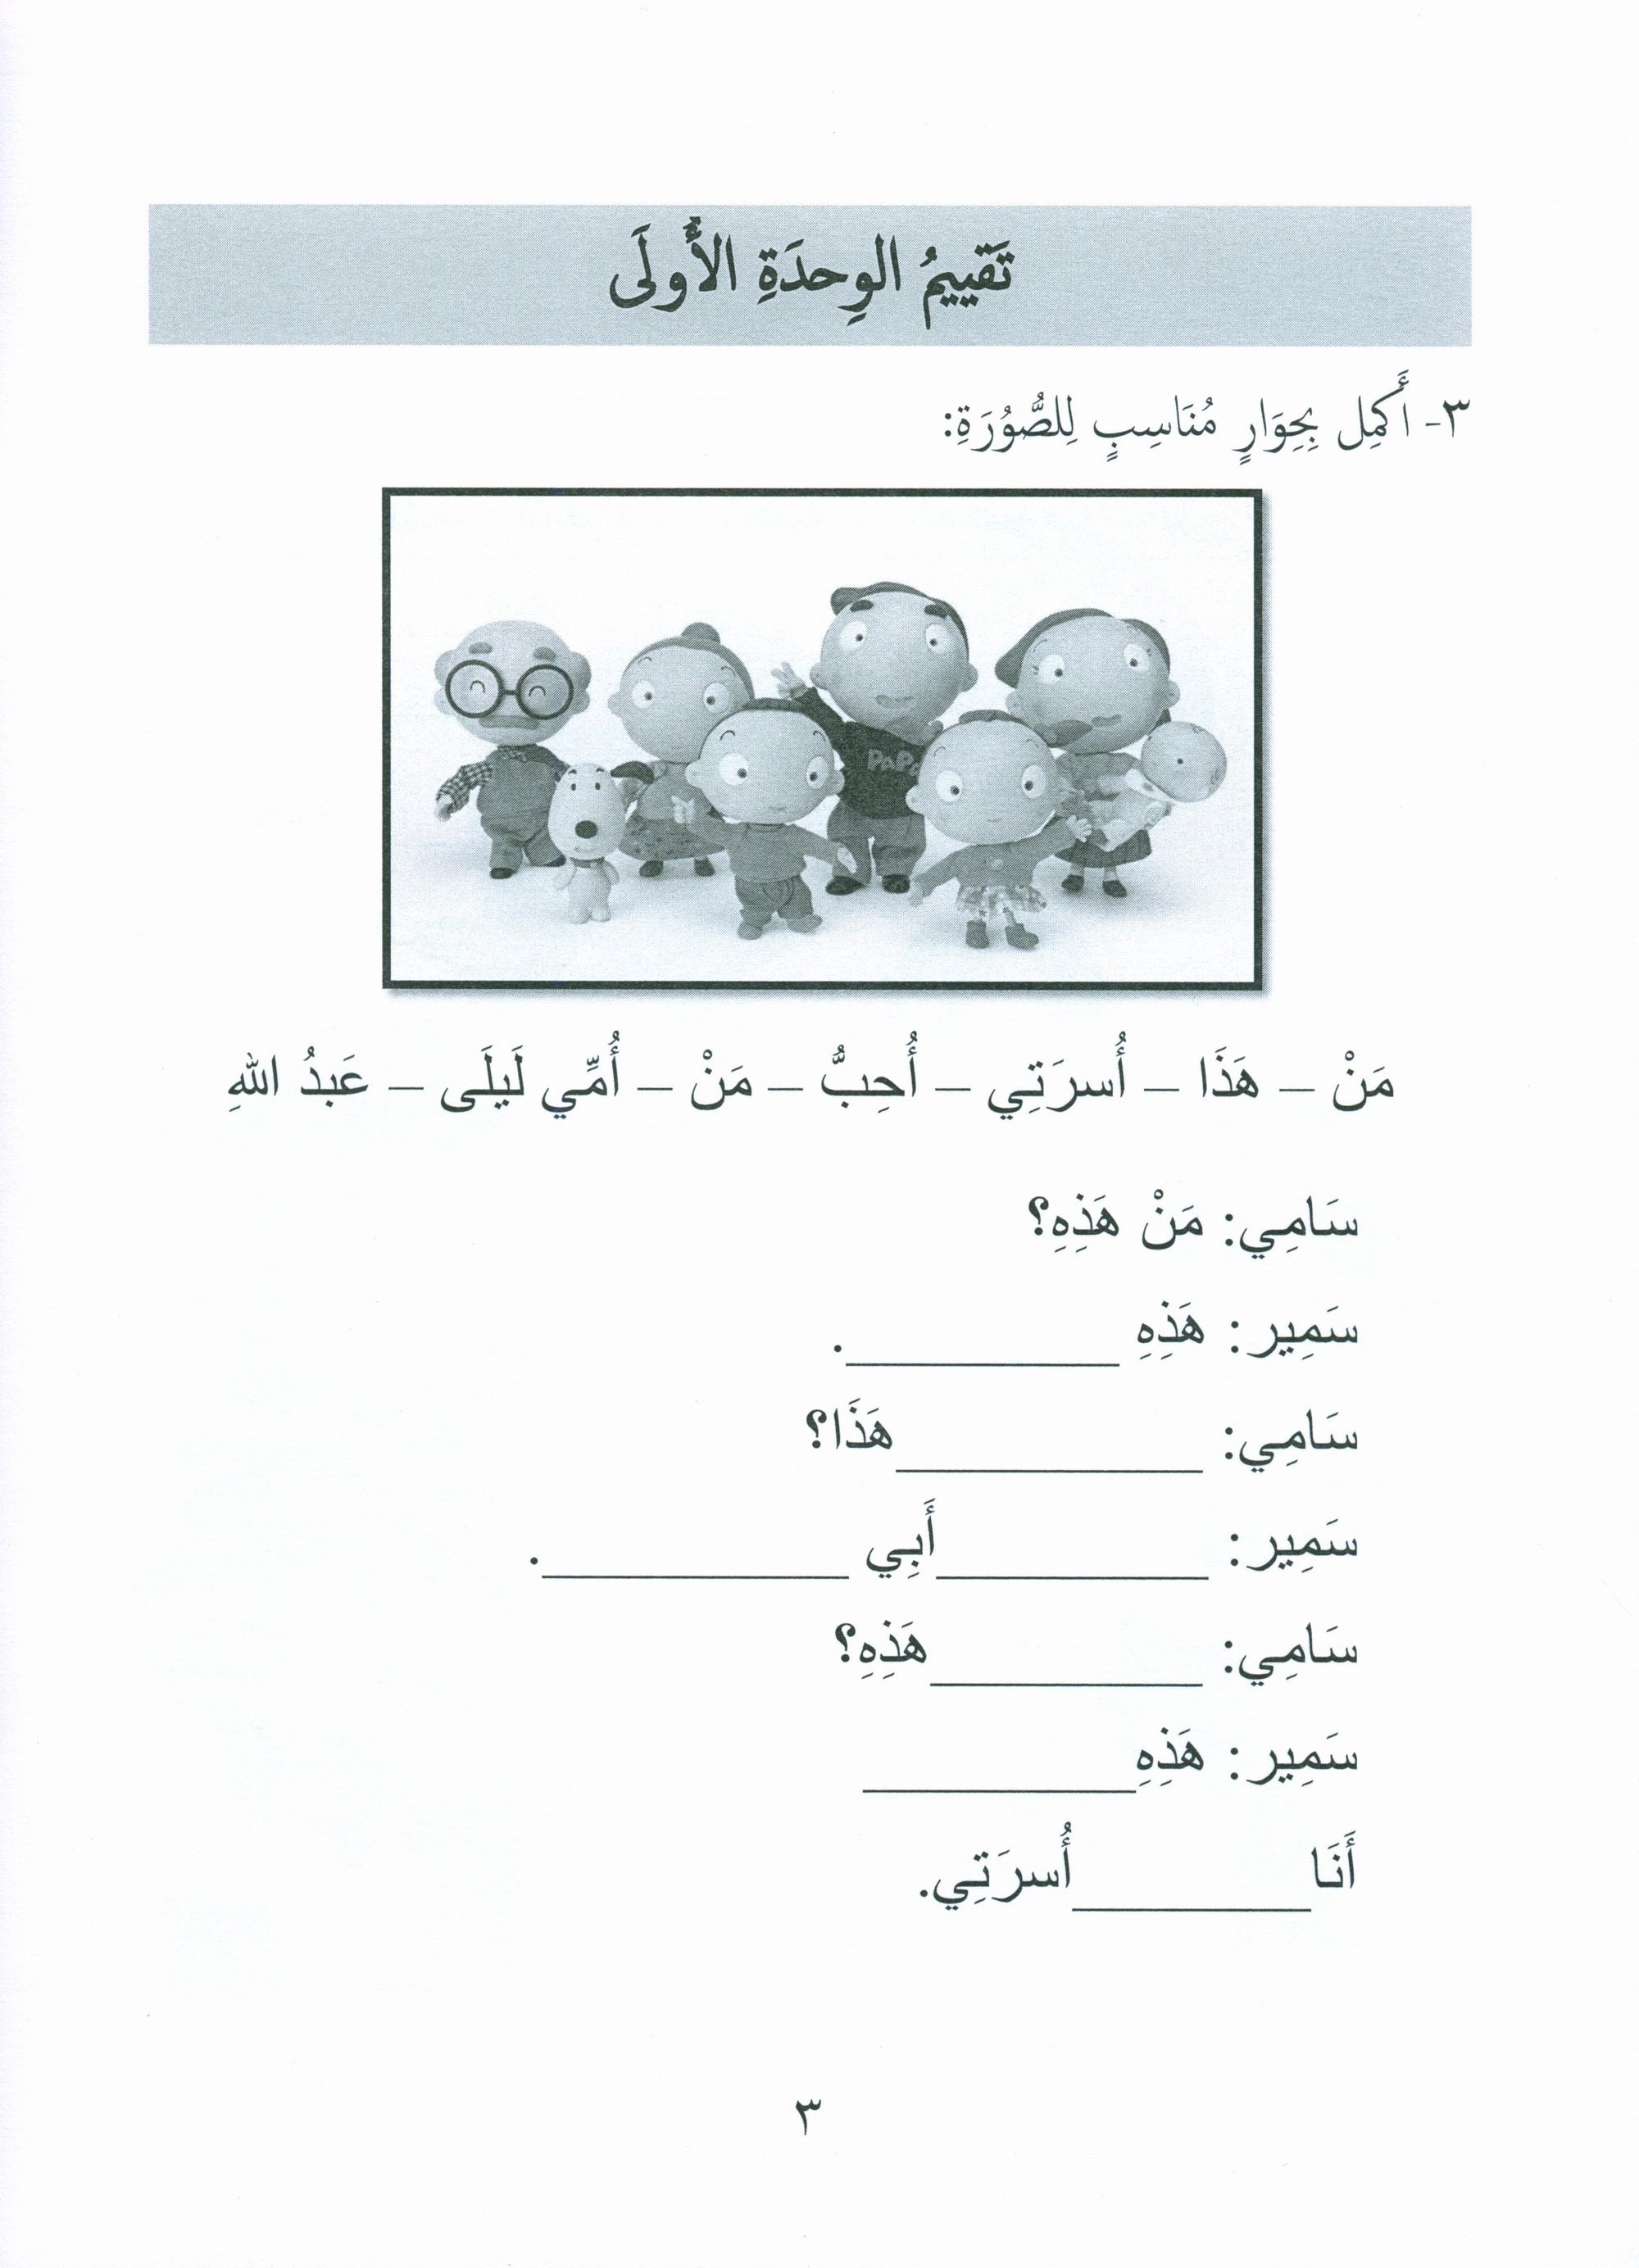 Our Language Is Our Pride Assessment Level 2 لغتنا فخرنا